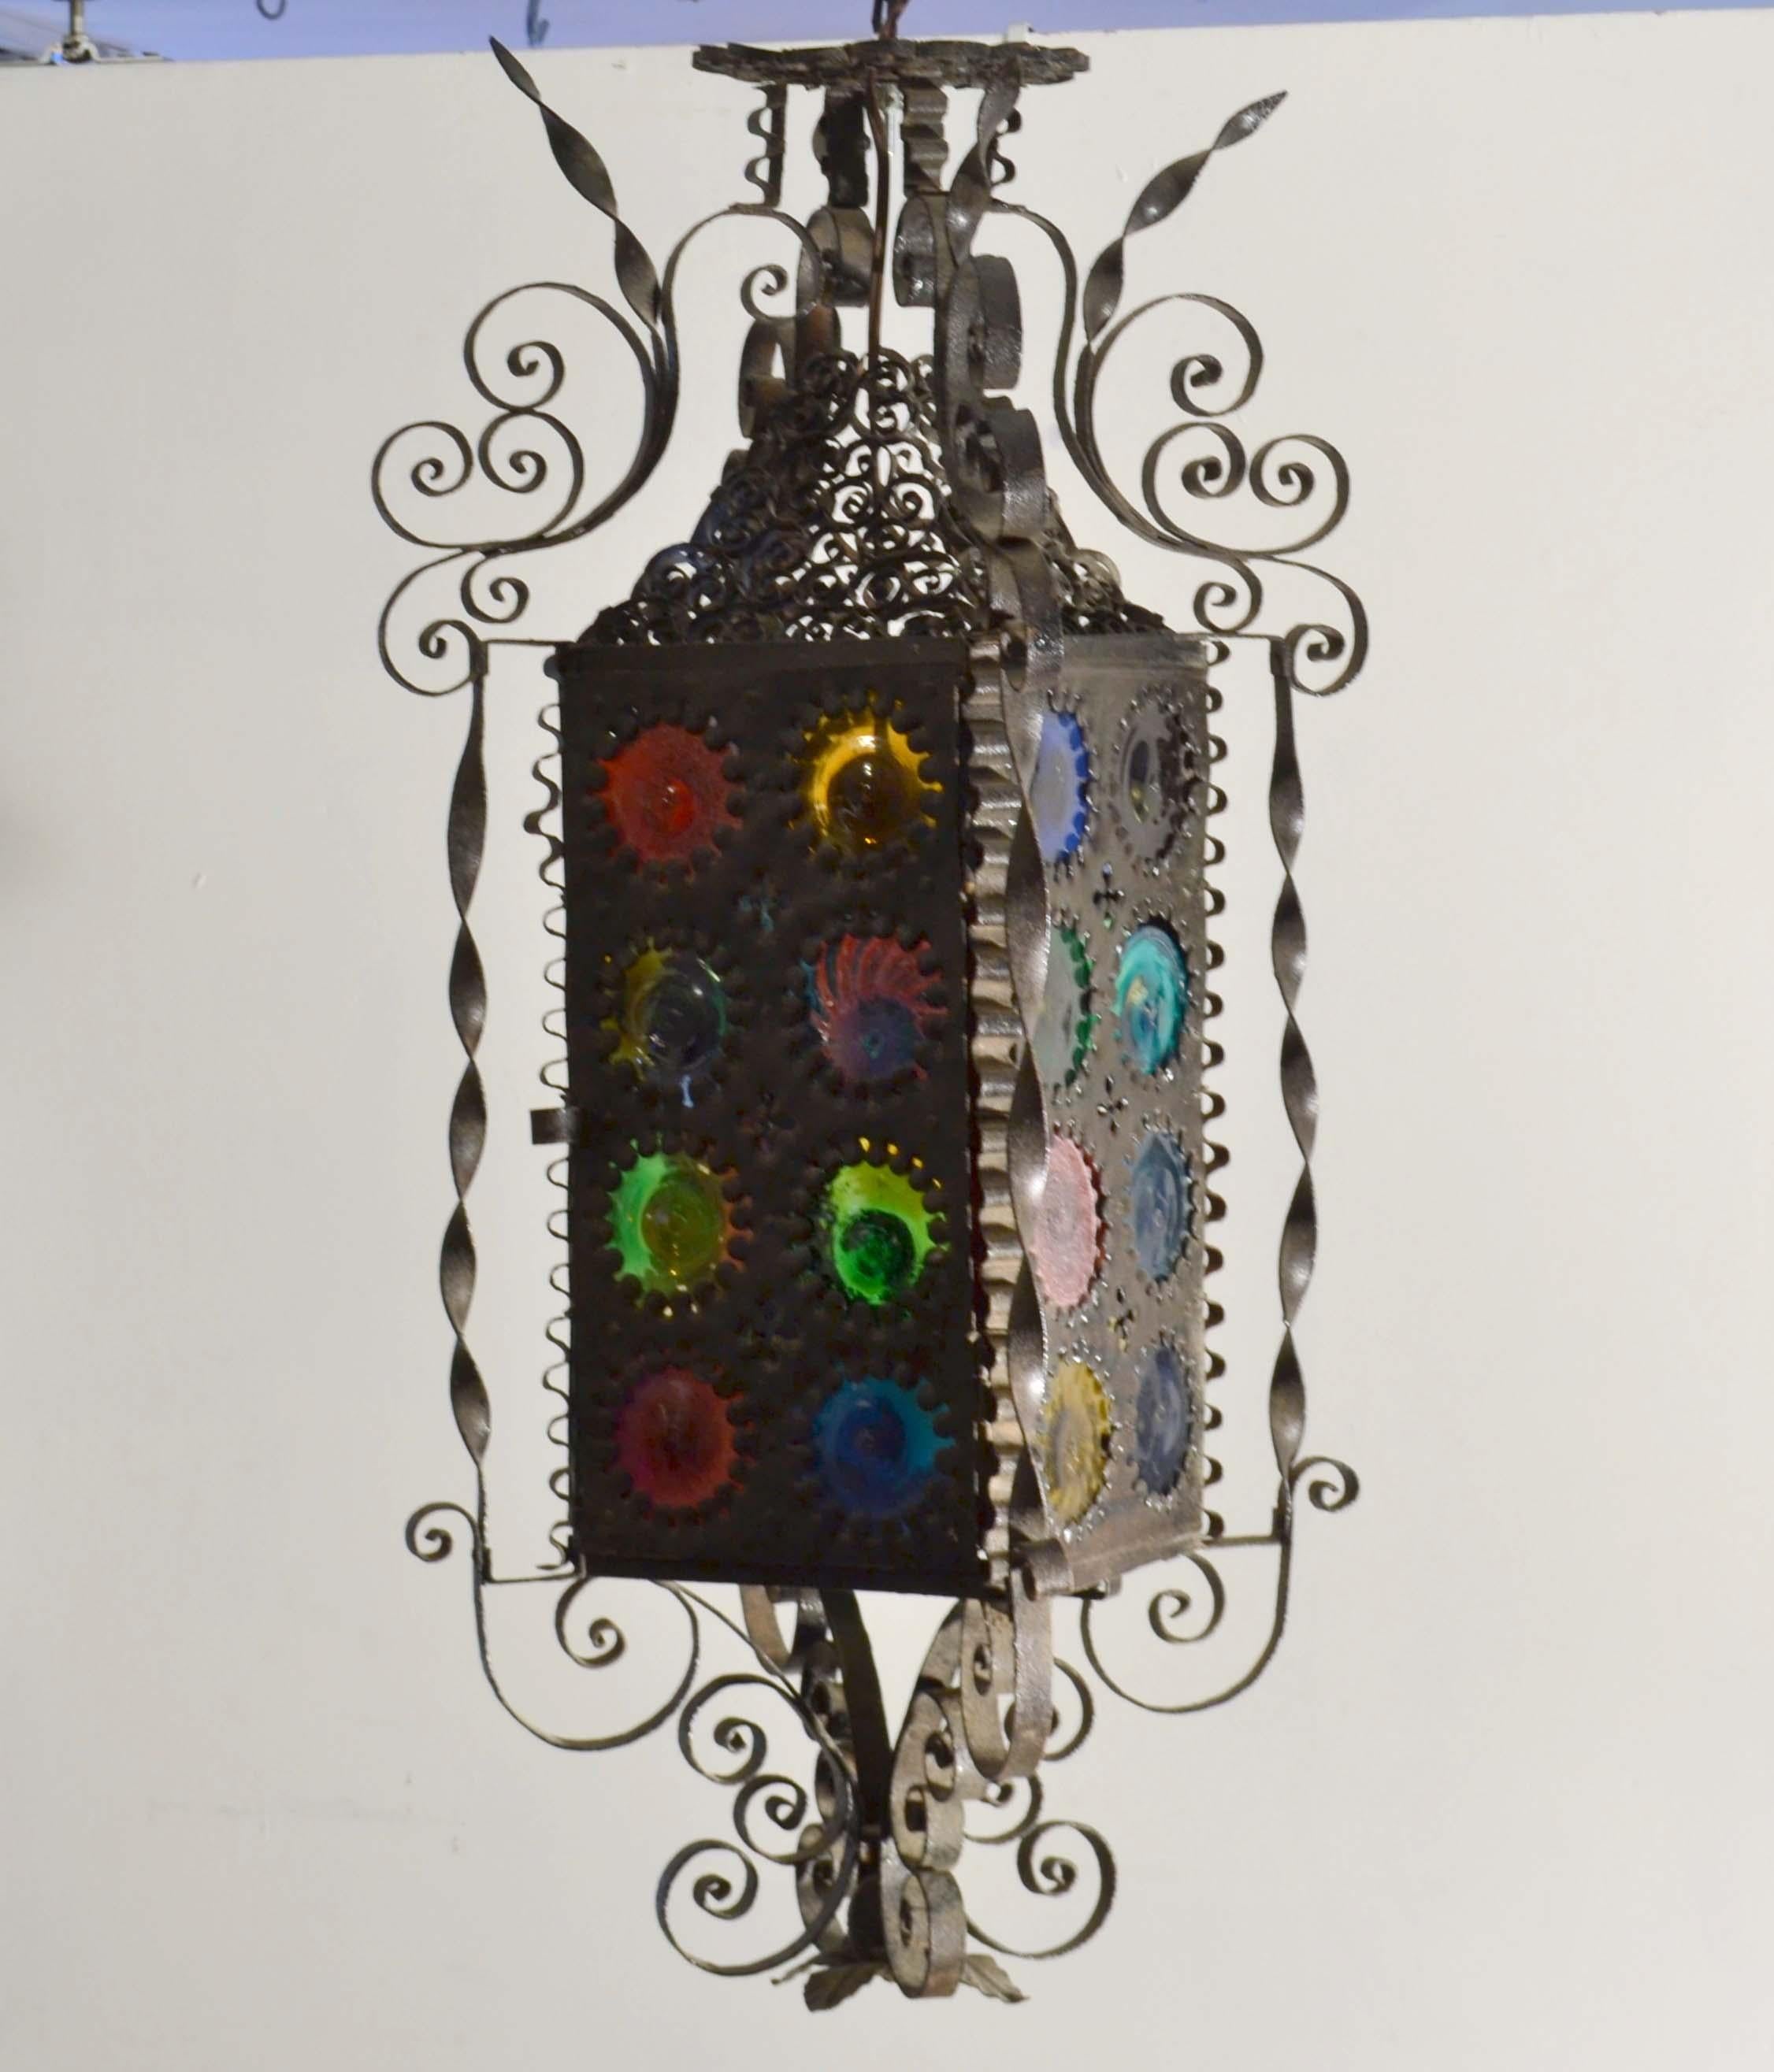 A late 20th century Italian wrought iron lantern with its multicolored stained round glass. Each disk is unique, hand blown and hand colored probably originated from the Venetian island of Murano with its beginnings since the 13th century. The